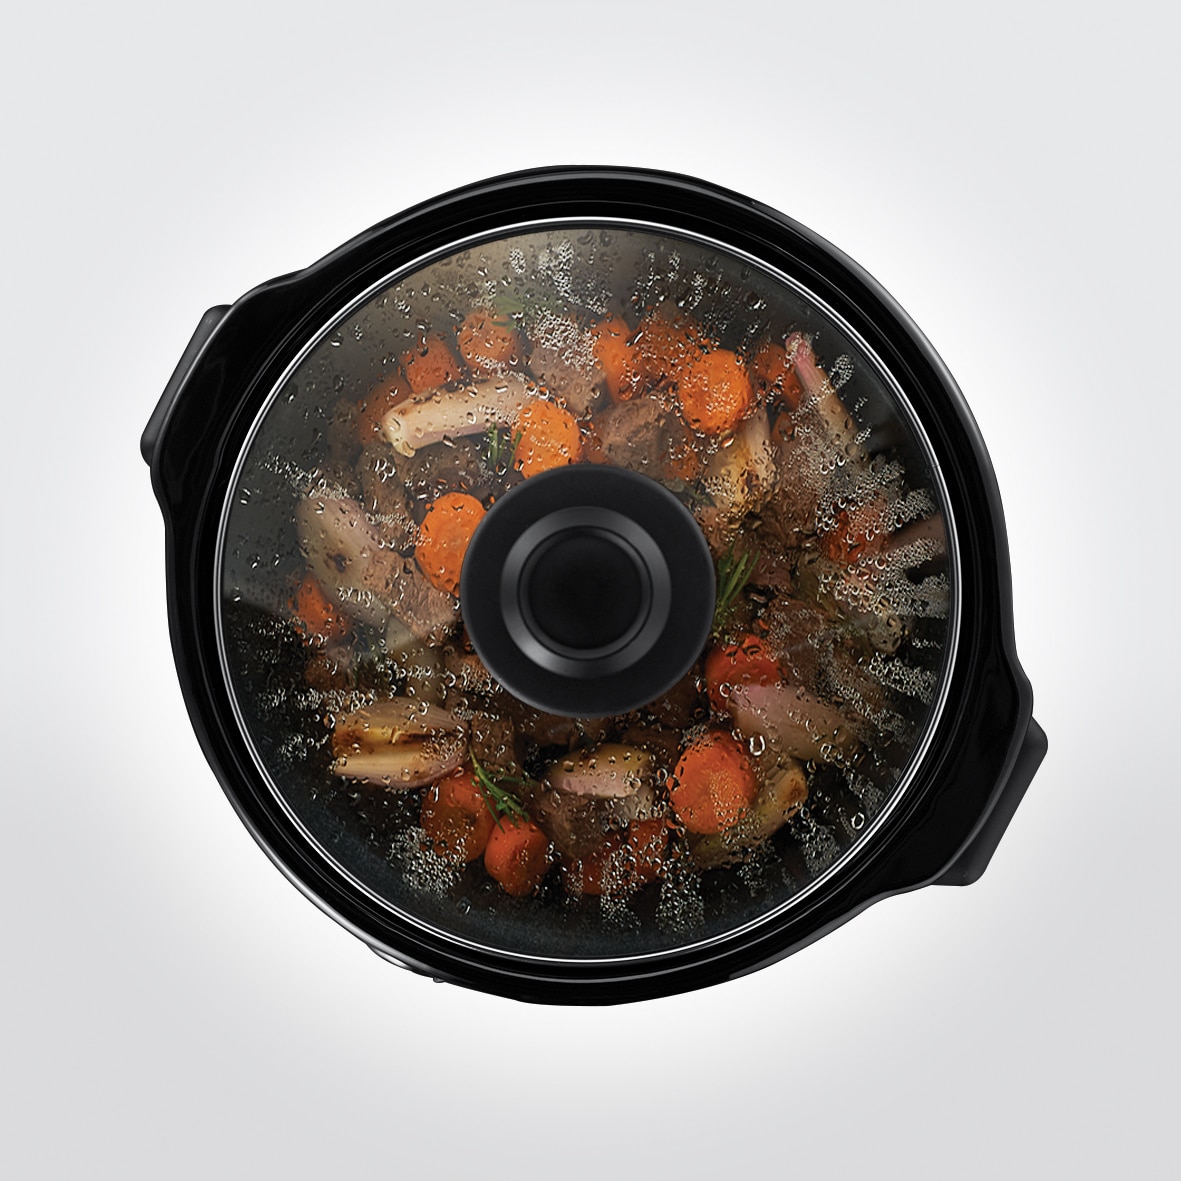 Slow cooker Russell Hobbs Home ceramic, Design compact, Vas L, Inox 25570-56, 145 Compact W, 2